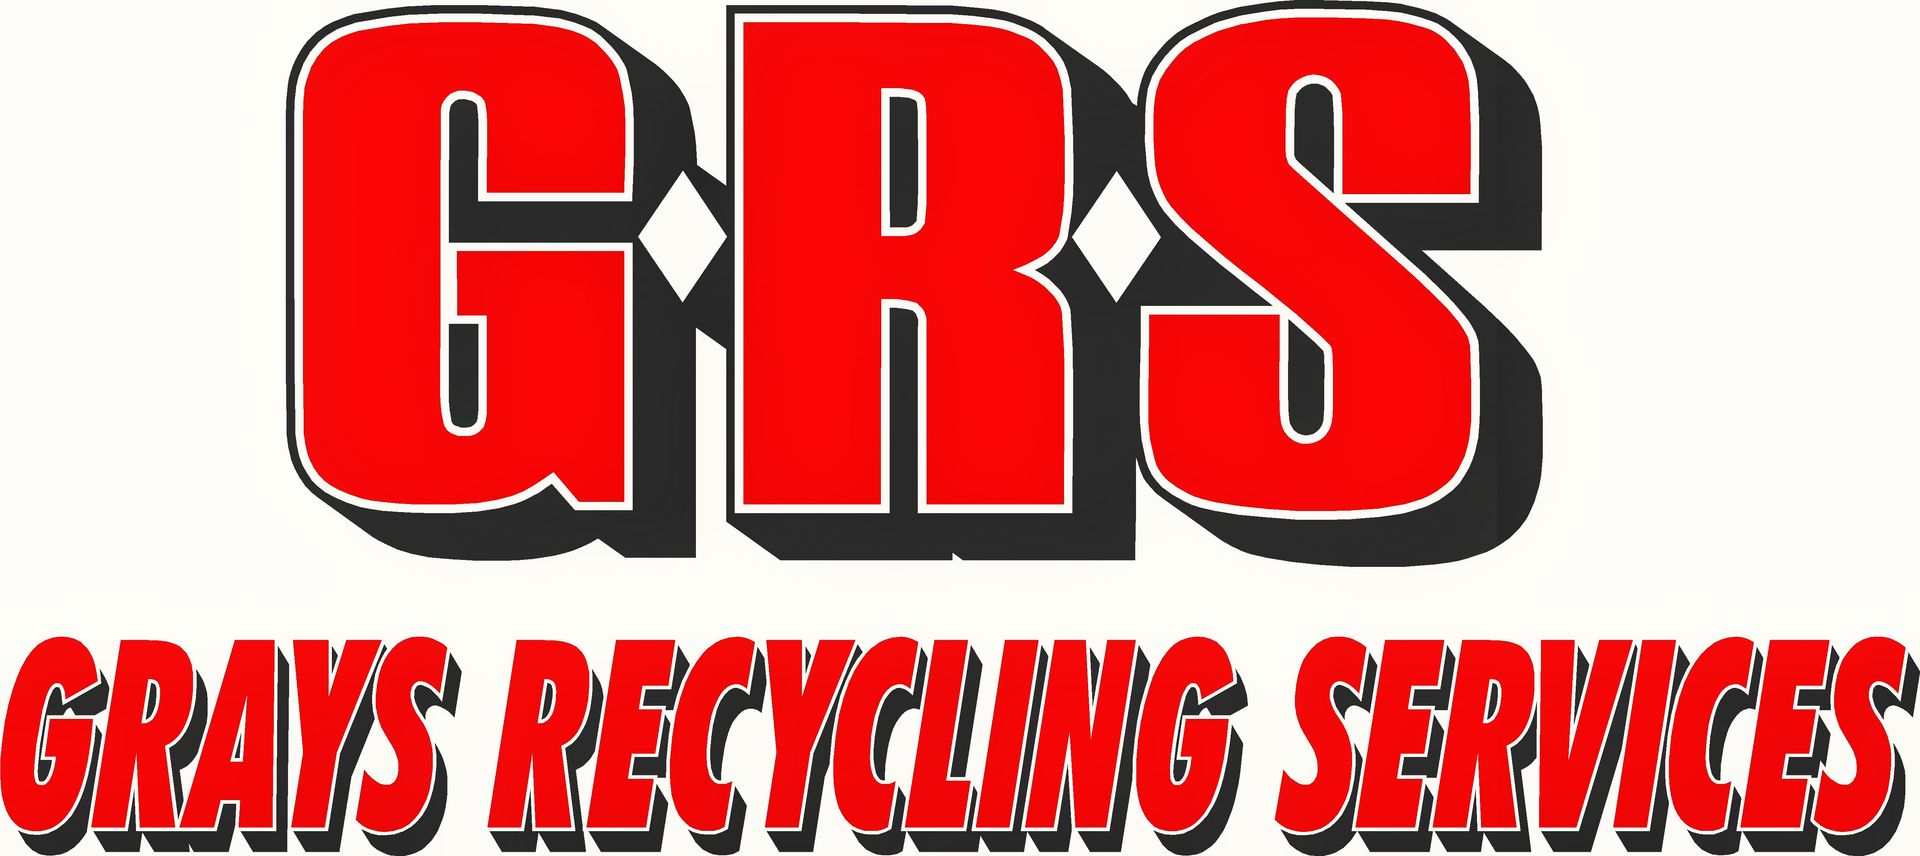 Grays Recycling Services logo